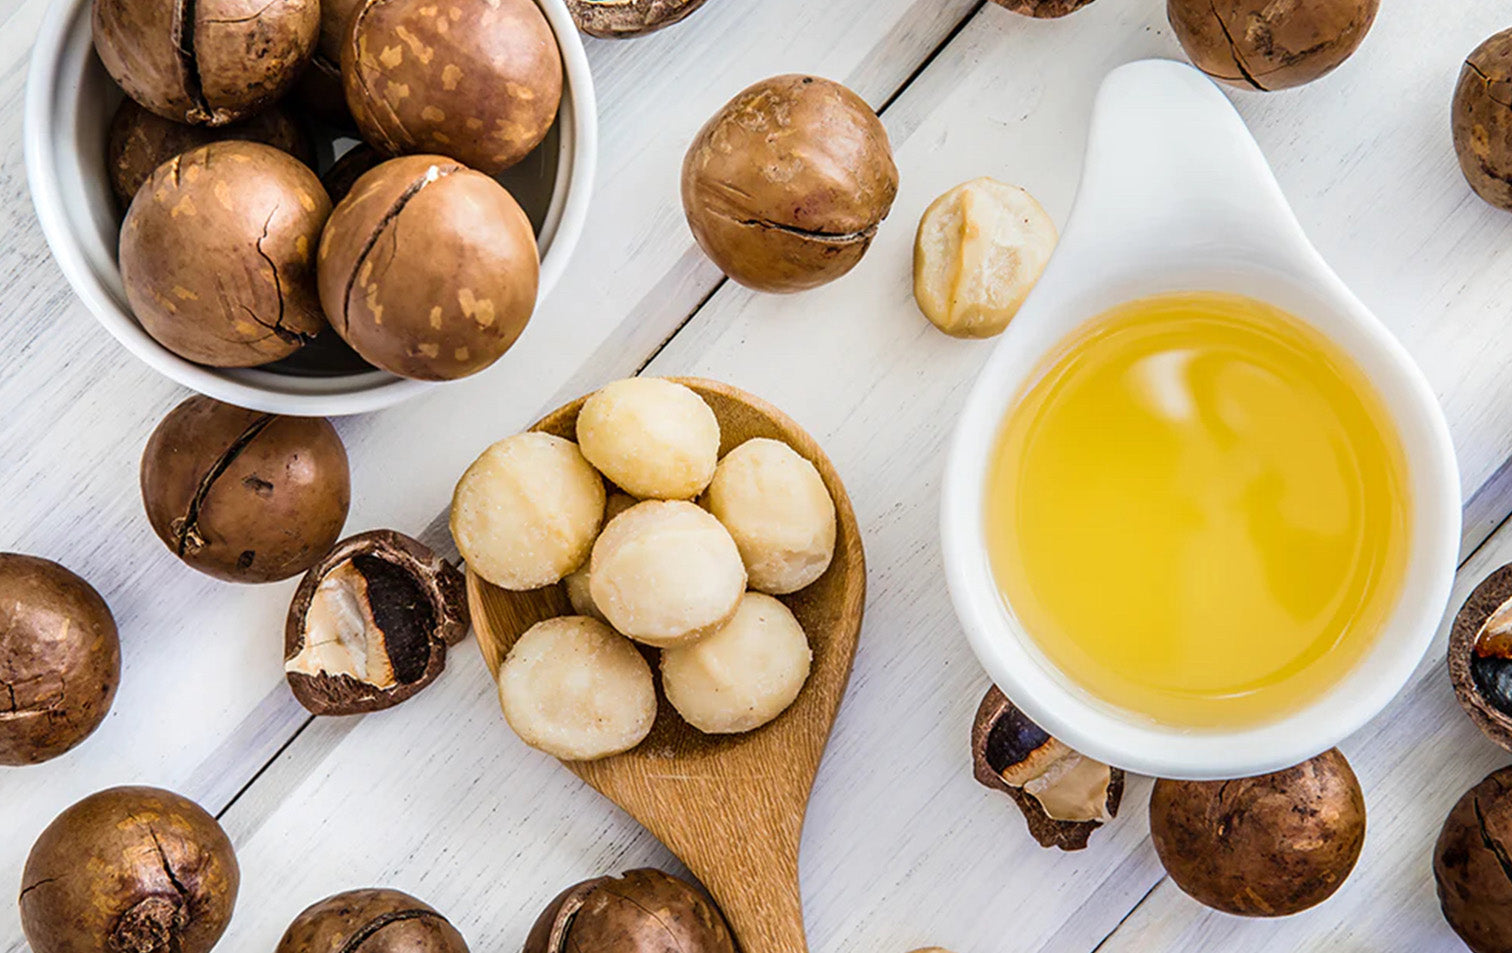 Macadamia Oil For Hair: Why, Benefits &amp; How To Use Macadamia Oil